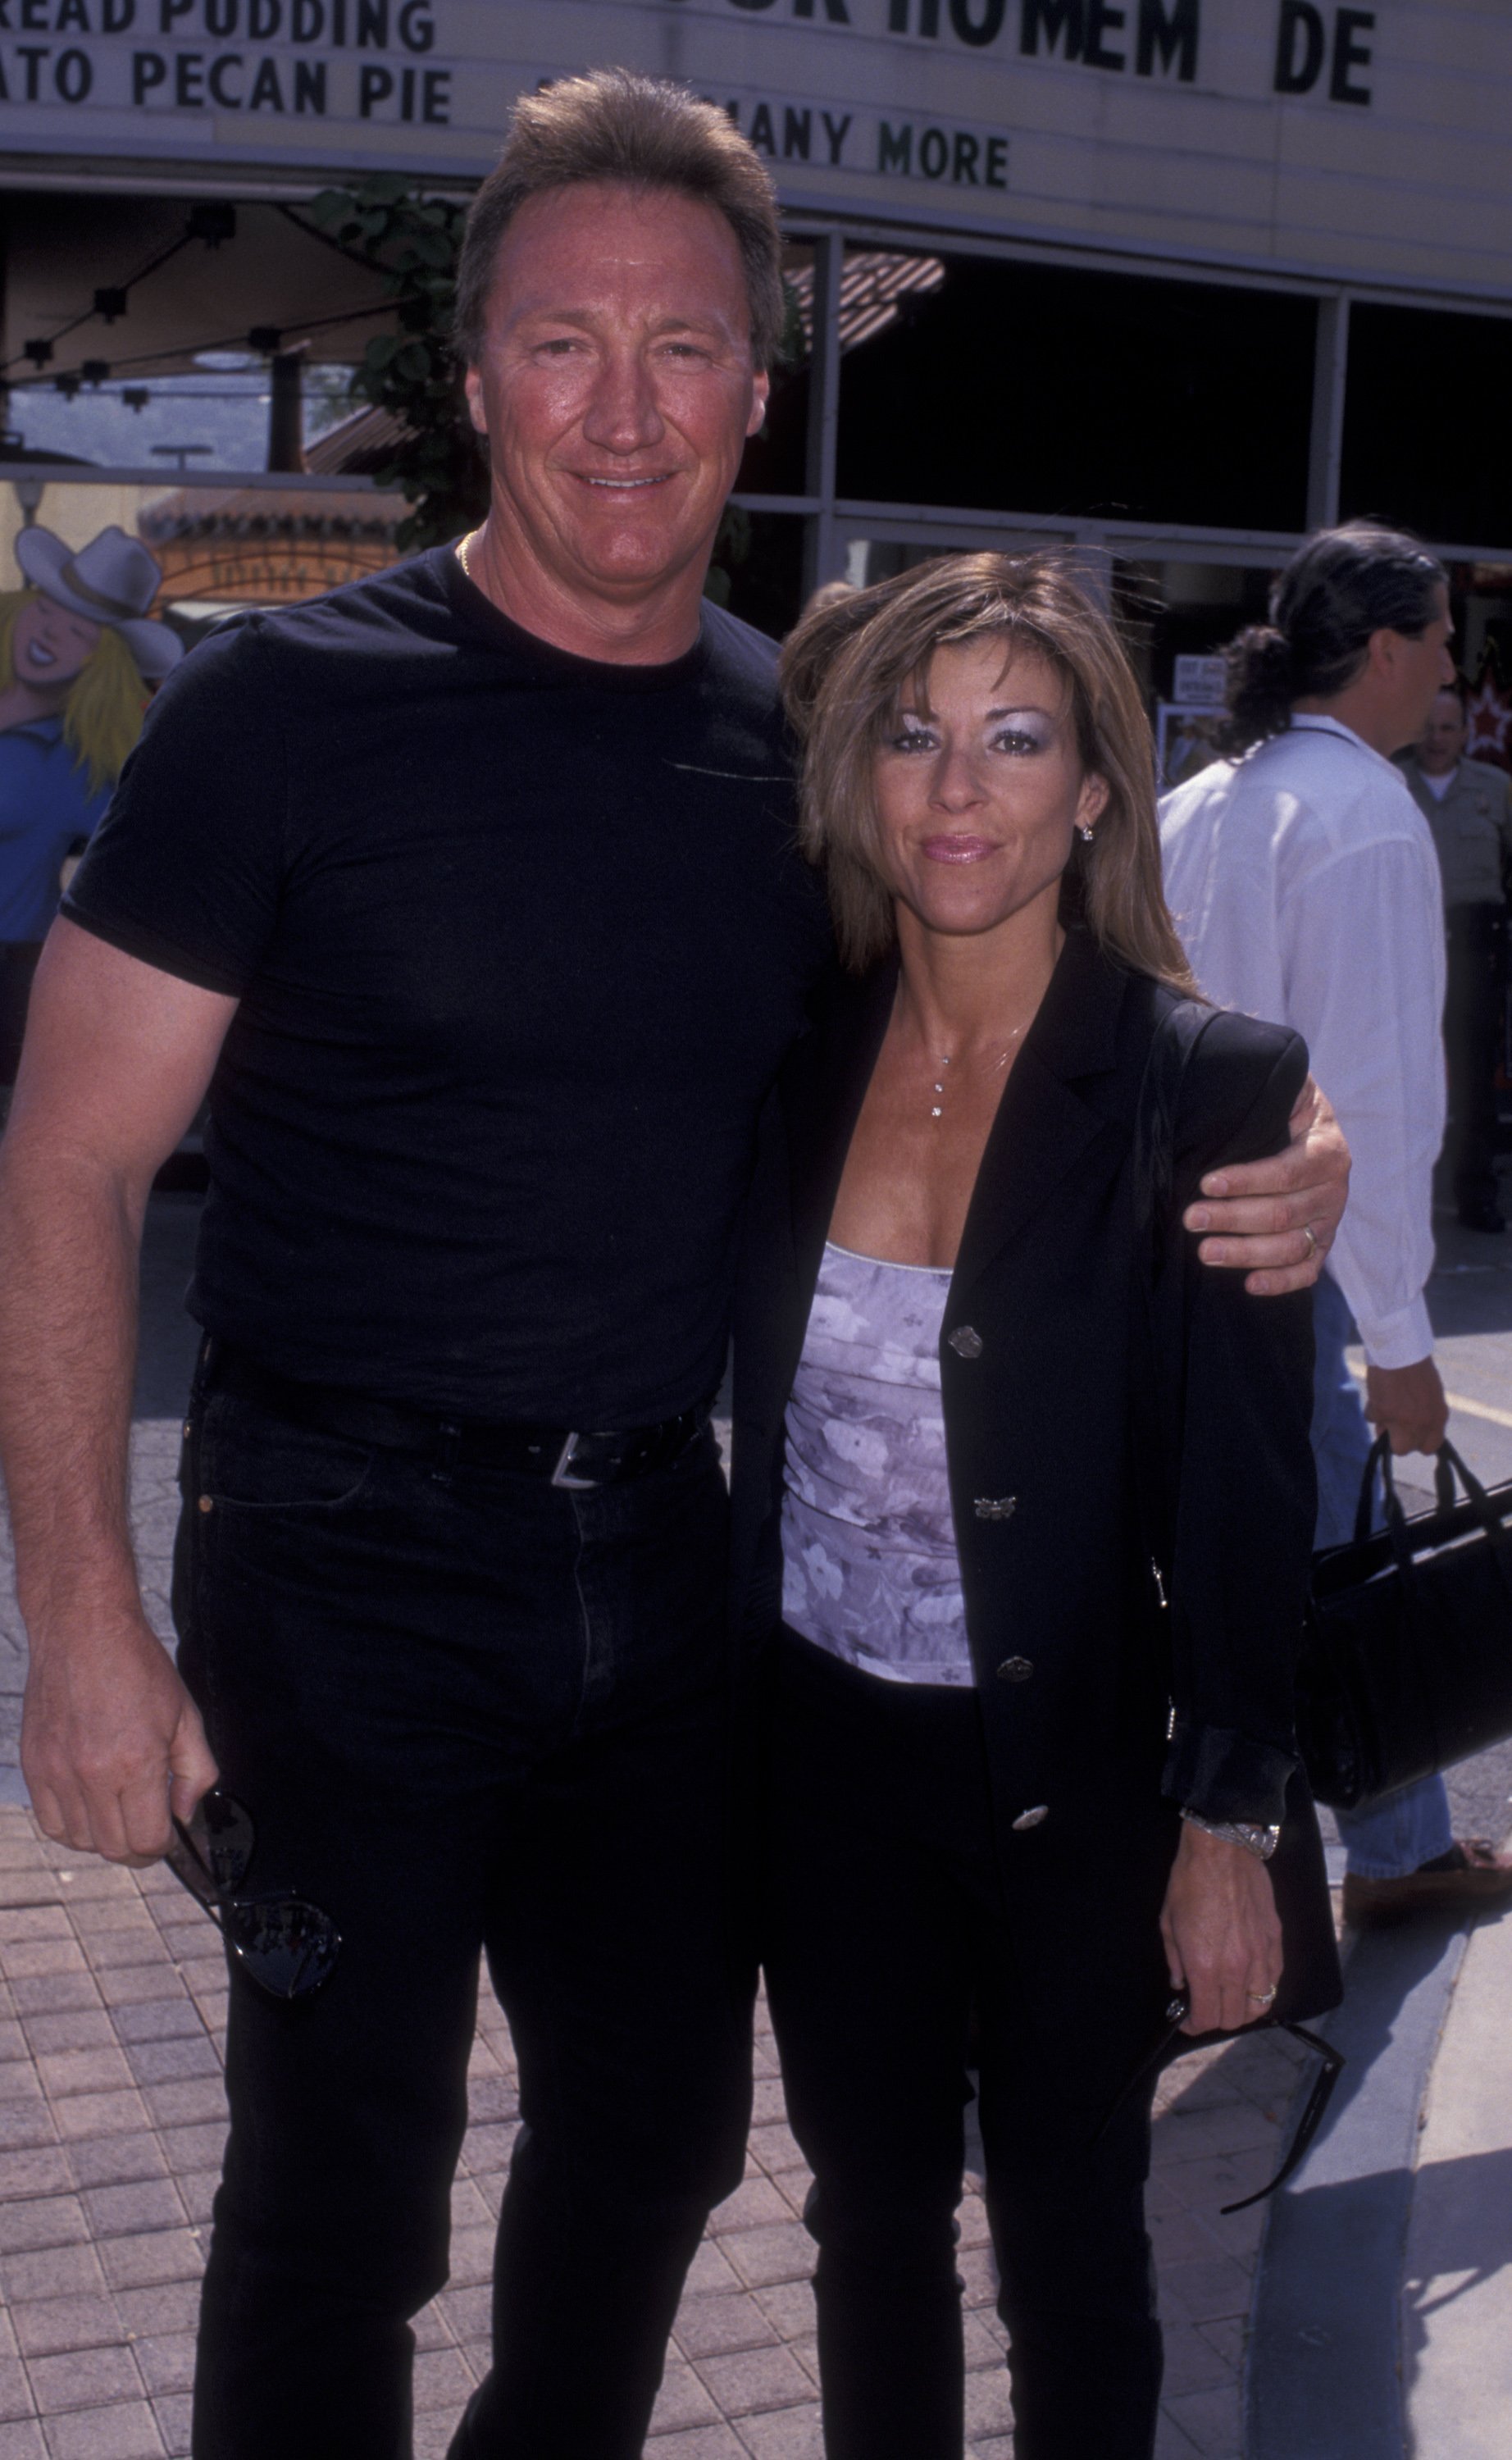 Alan Autry and Kimberlee Autry at\u00a0the 34th Annual Academy of Country Music Awards hosted at the Country Star Restaurant, Universal City, California\u00a0on May 4, 1999 | Source: Getty Images